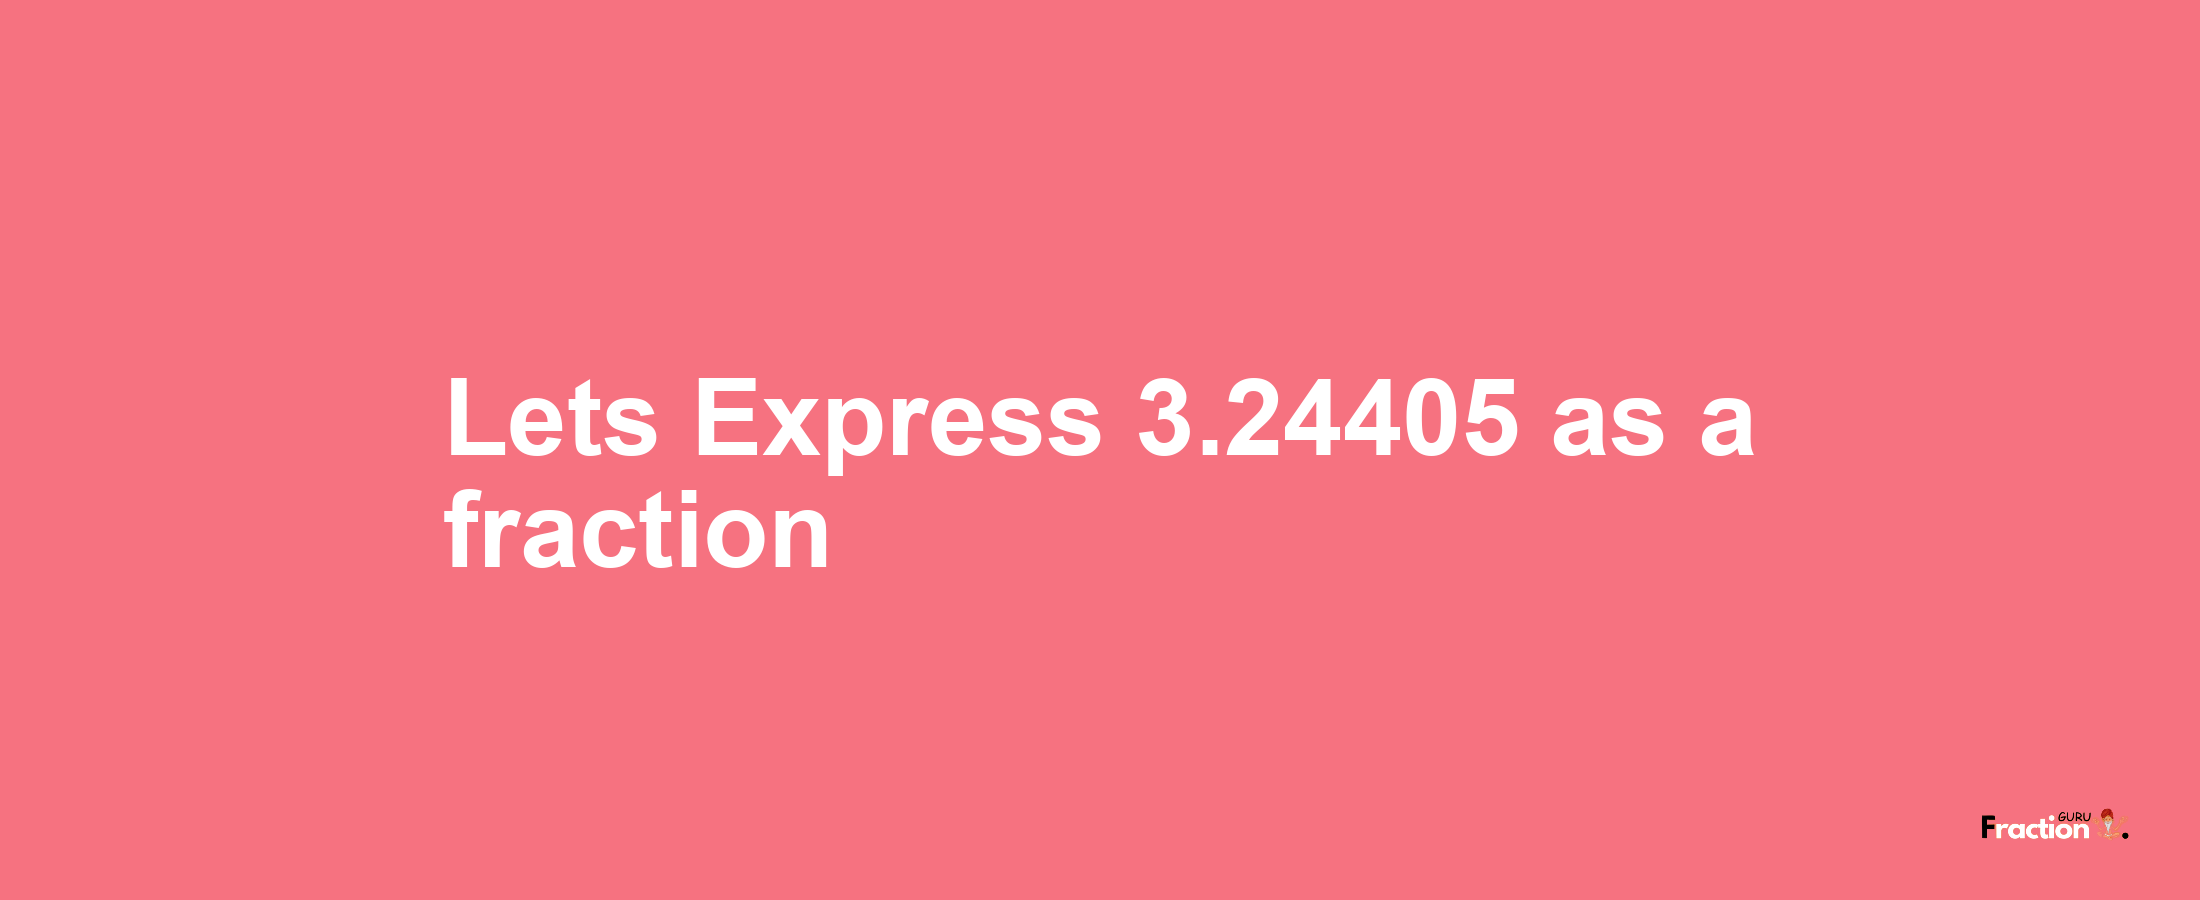 Lets Express 3.24405 as afraction